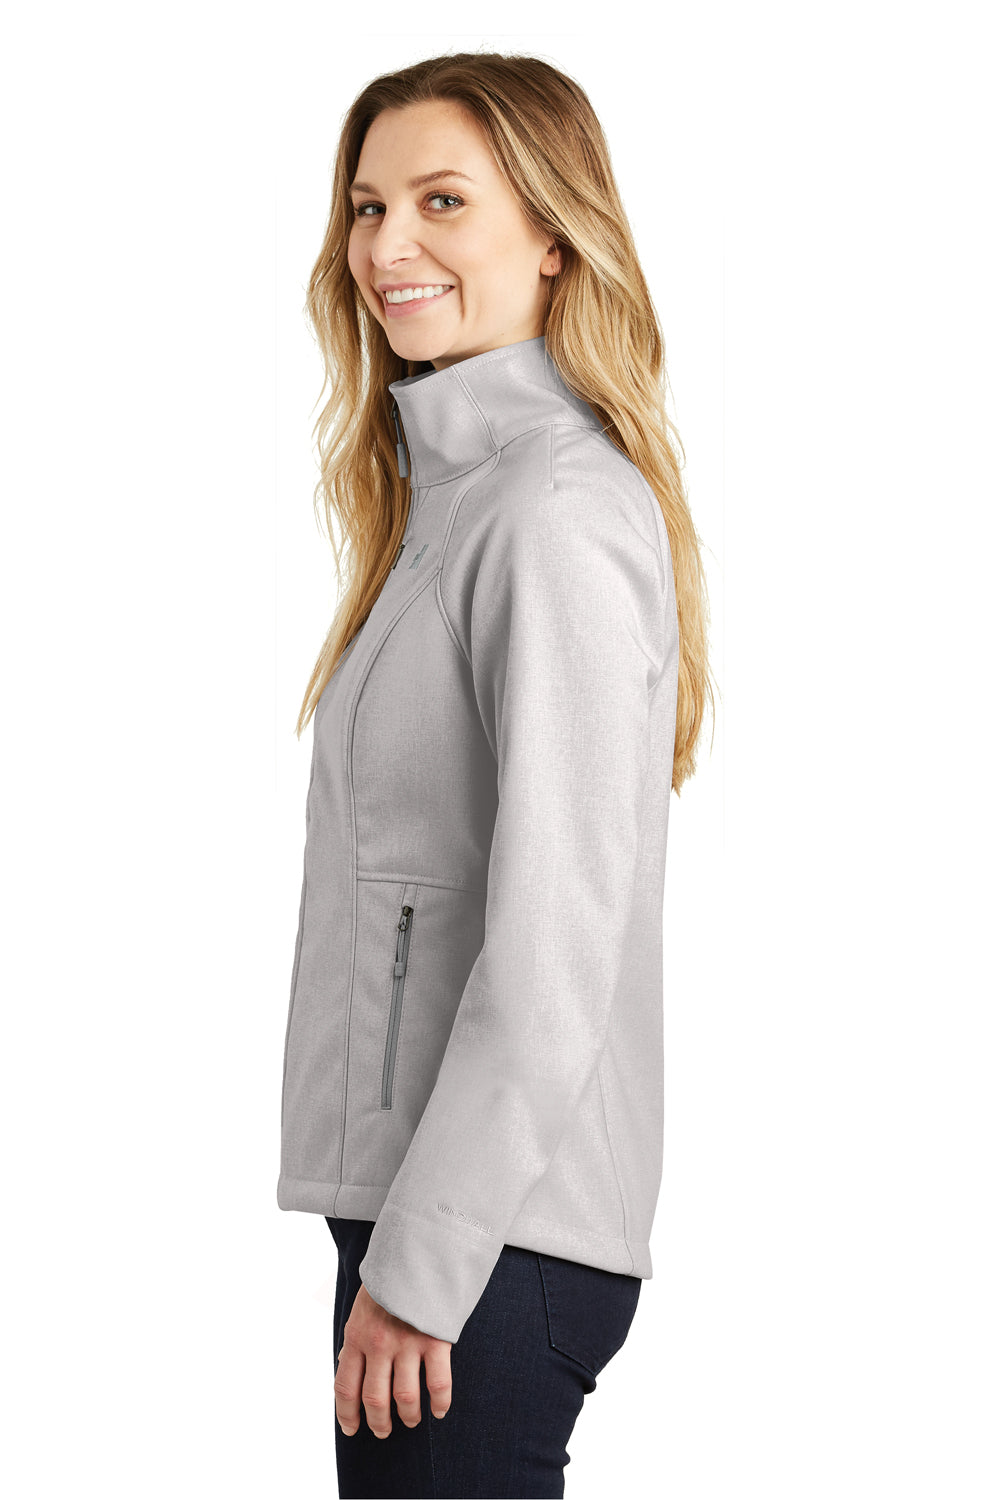 The North Face NF0A3LGU Womens Apex Barrier Wind & Resistant Full Zip Jacket Heather Light Grey Side